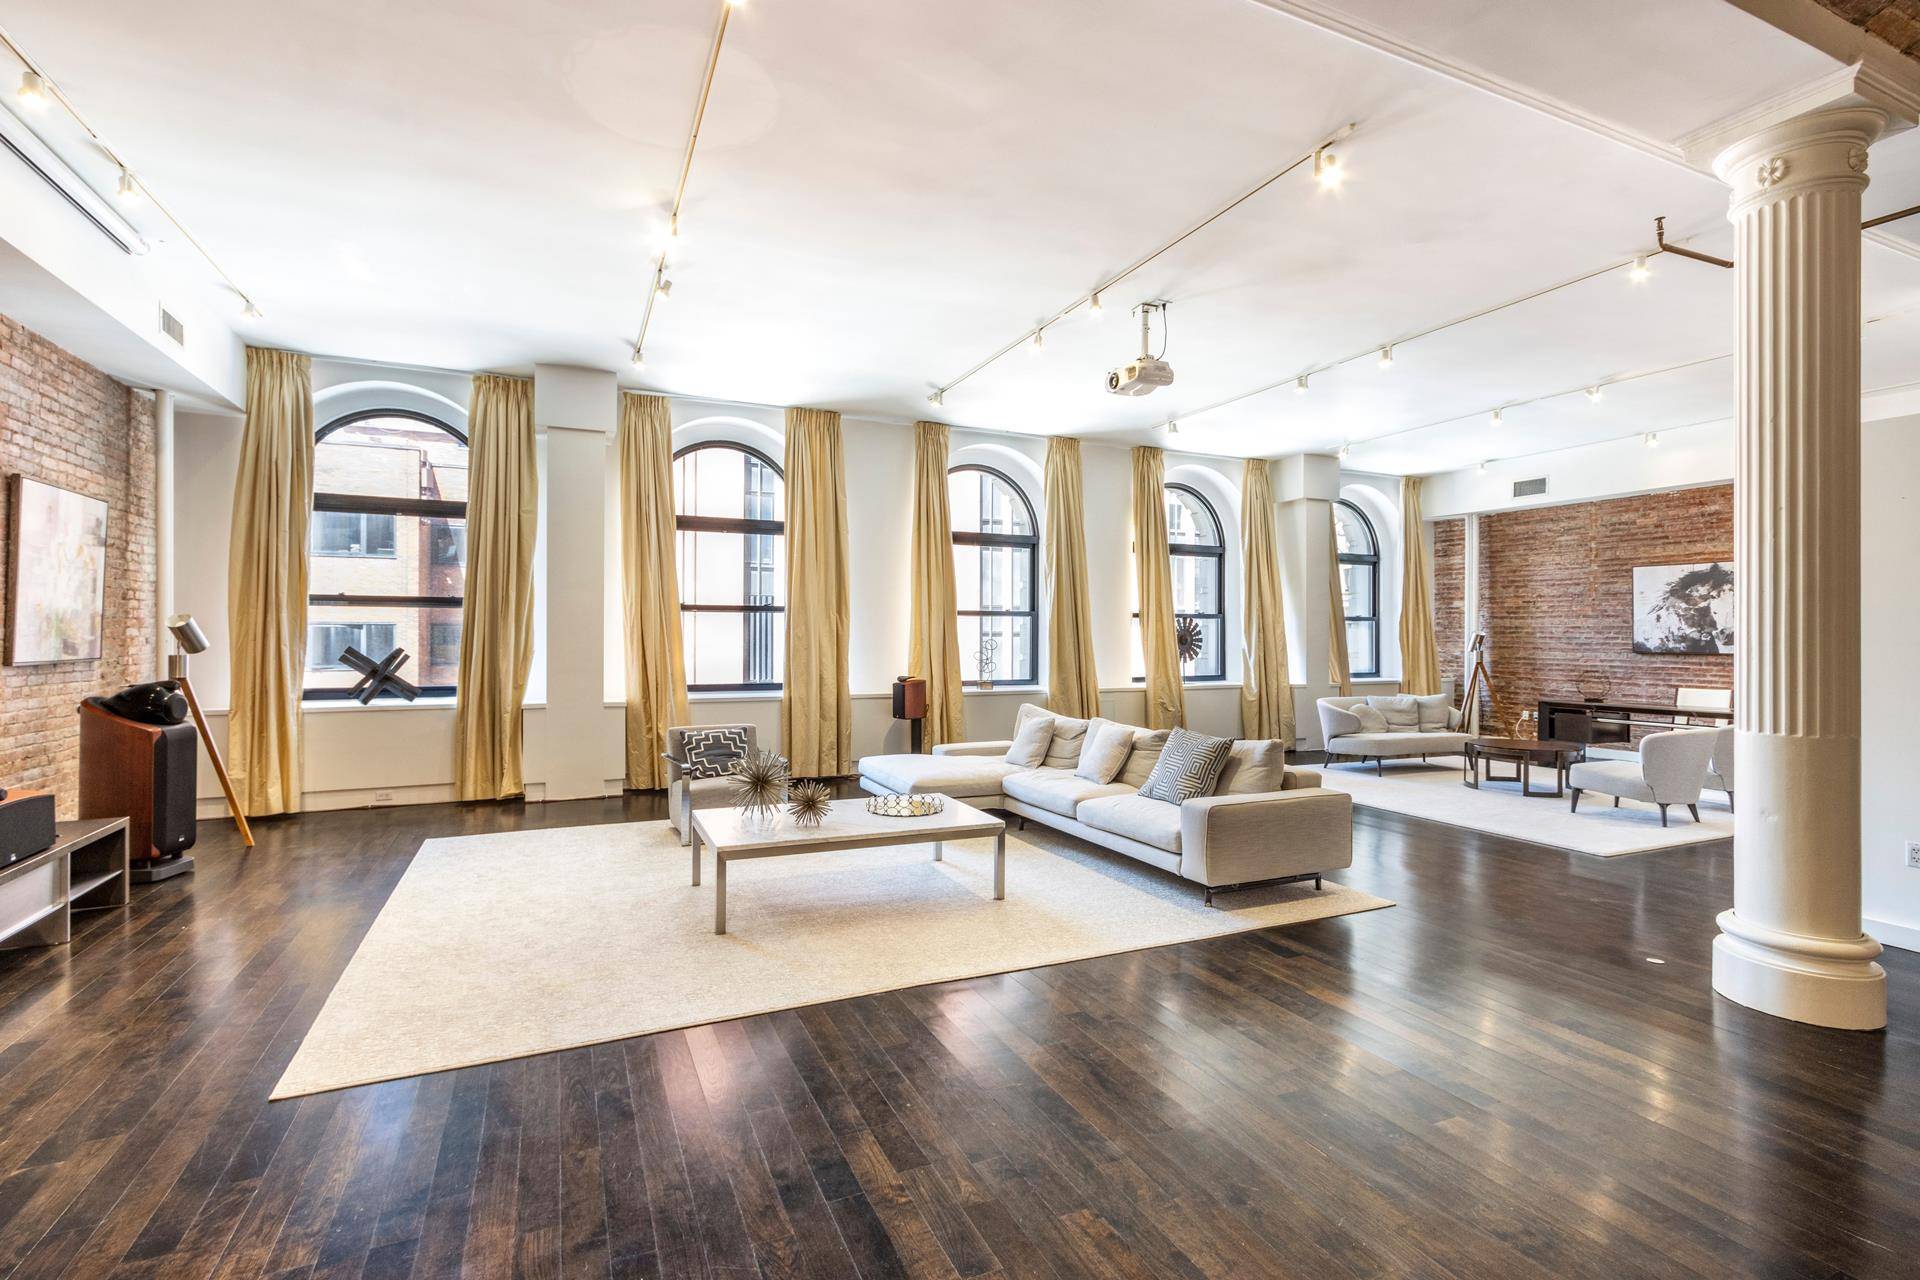 At this unsurpassed location where Noho meets Greenwich Village, this massive 4804SF full floor condominium loft offers extraordinary prewar original details coupled with beautifully renovated and restored interiors.